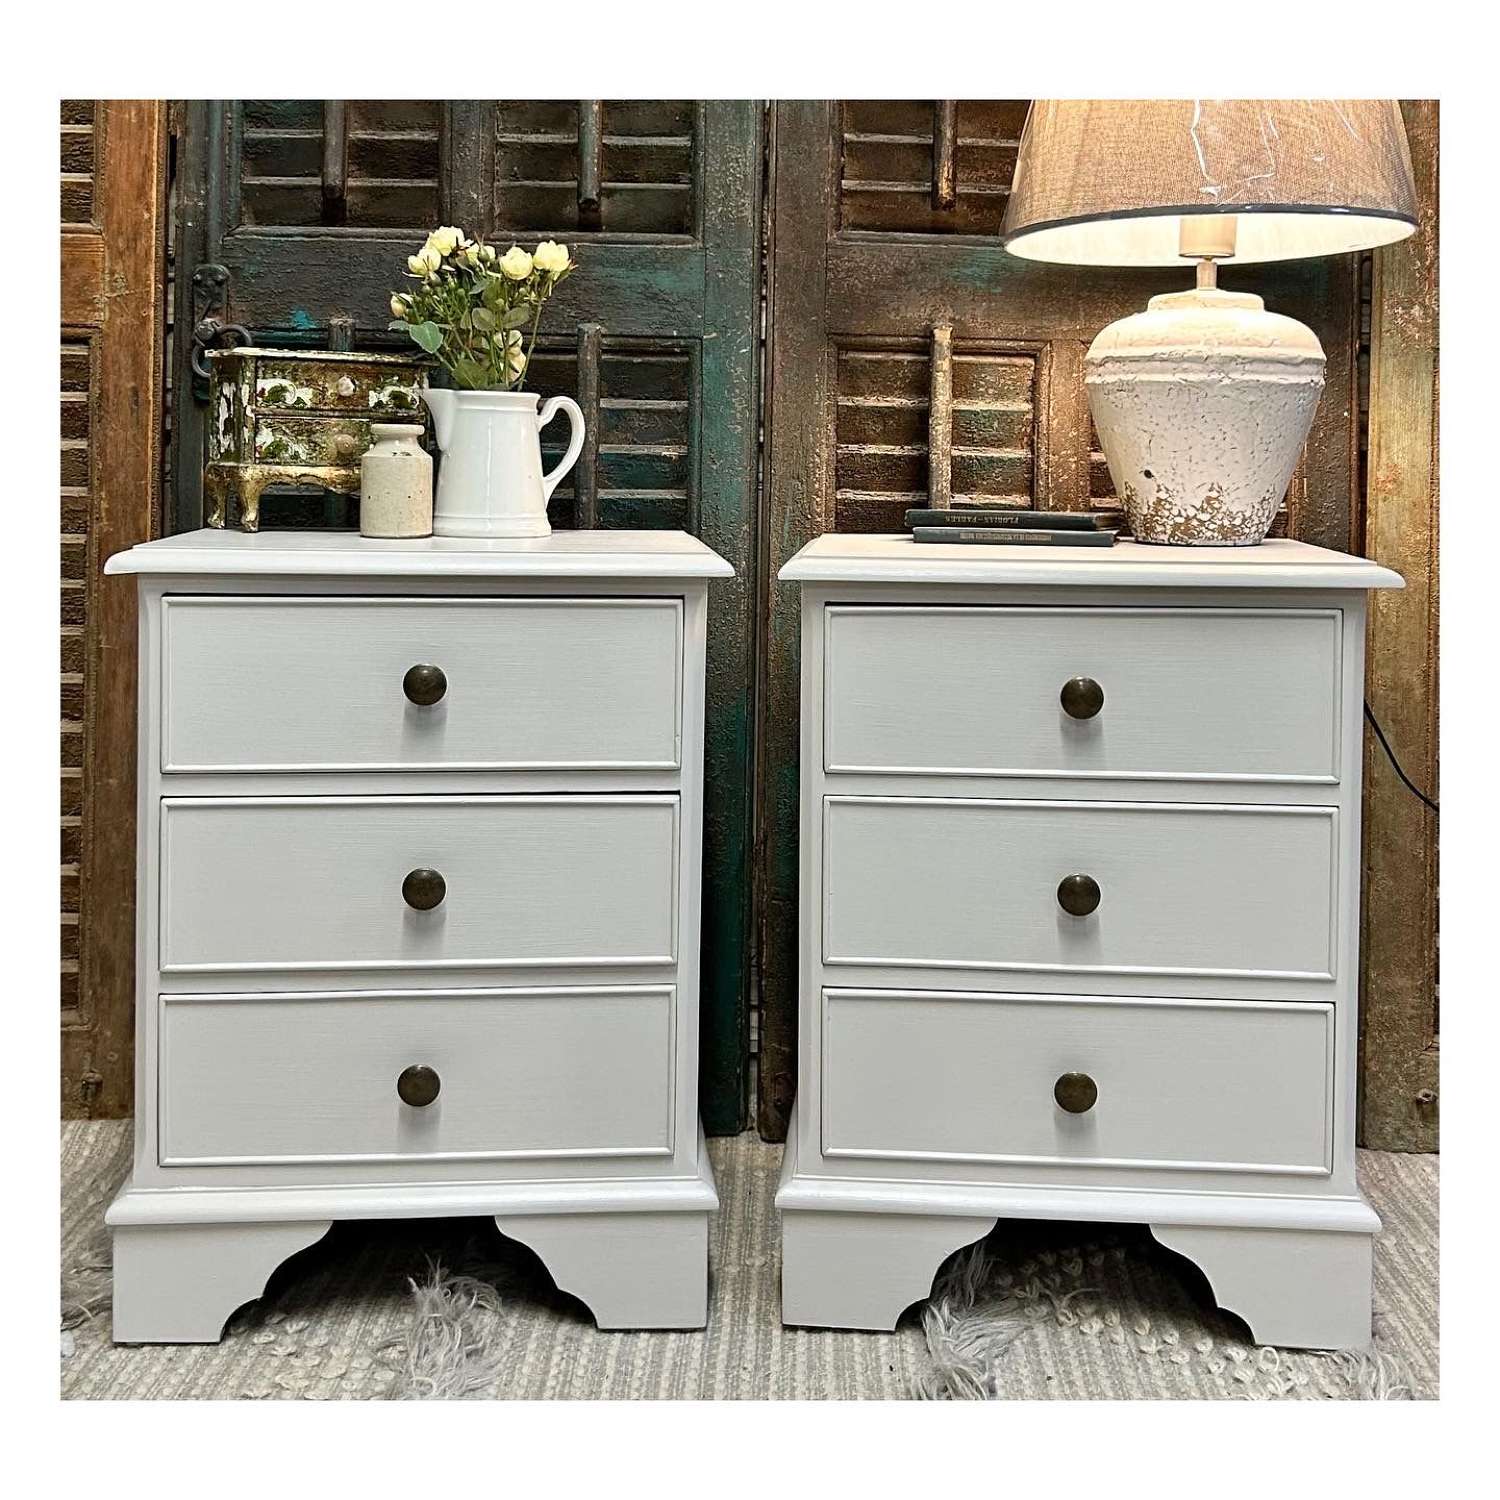 Pair of Painted Bedside Tables, Bedside Cabinets in French Grey